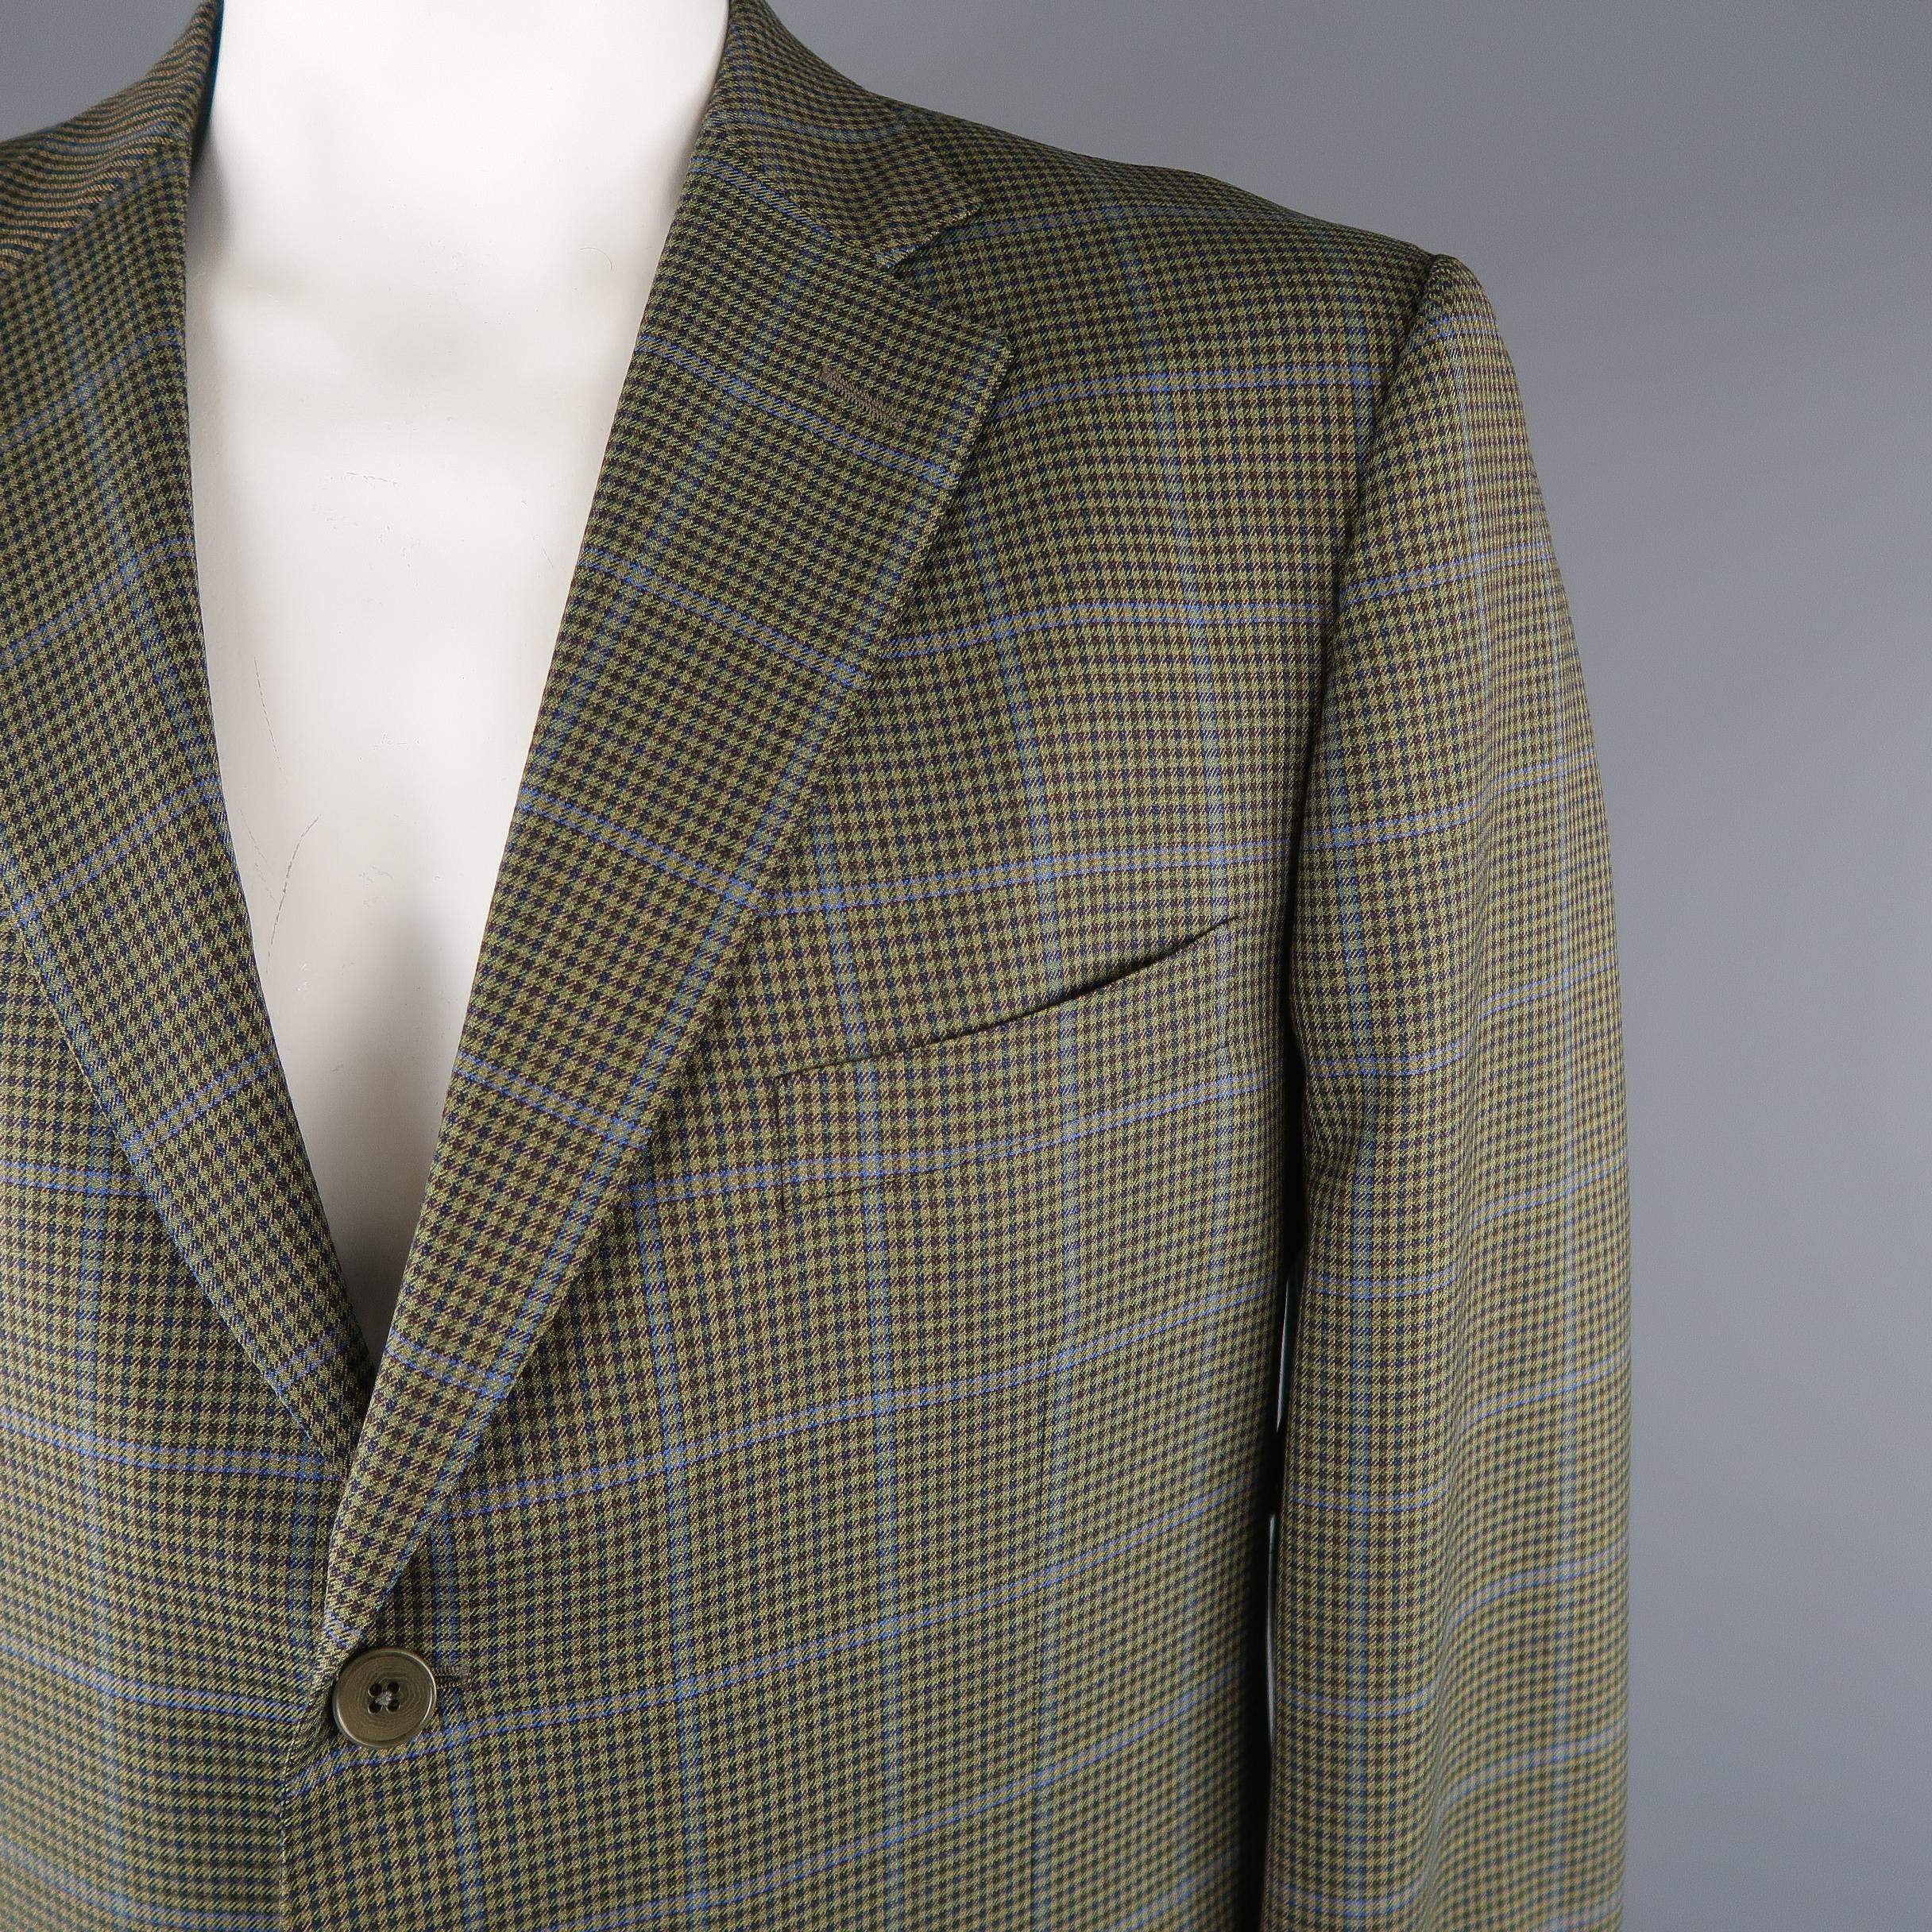 ERMENEGILDO ZEGNA long sport coat come in olive tone in houndstooth wool material, featuring notch lapel, 3 buttons on the closure, single breasted, flap pockets, and double vent on the hem. Made in Switzerland.
 
Excellent Pre-Owned